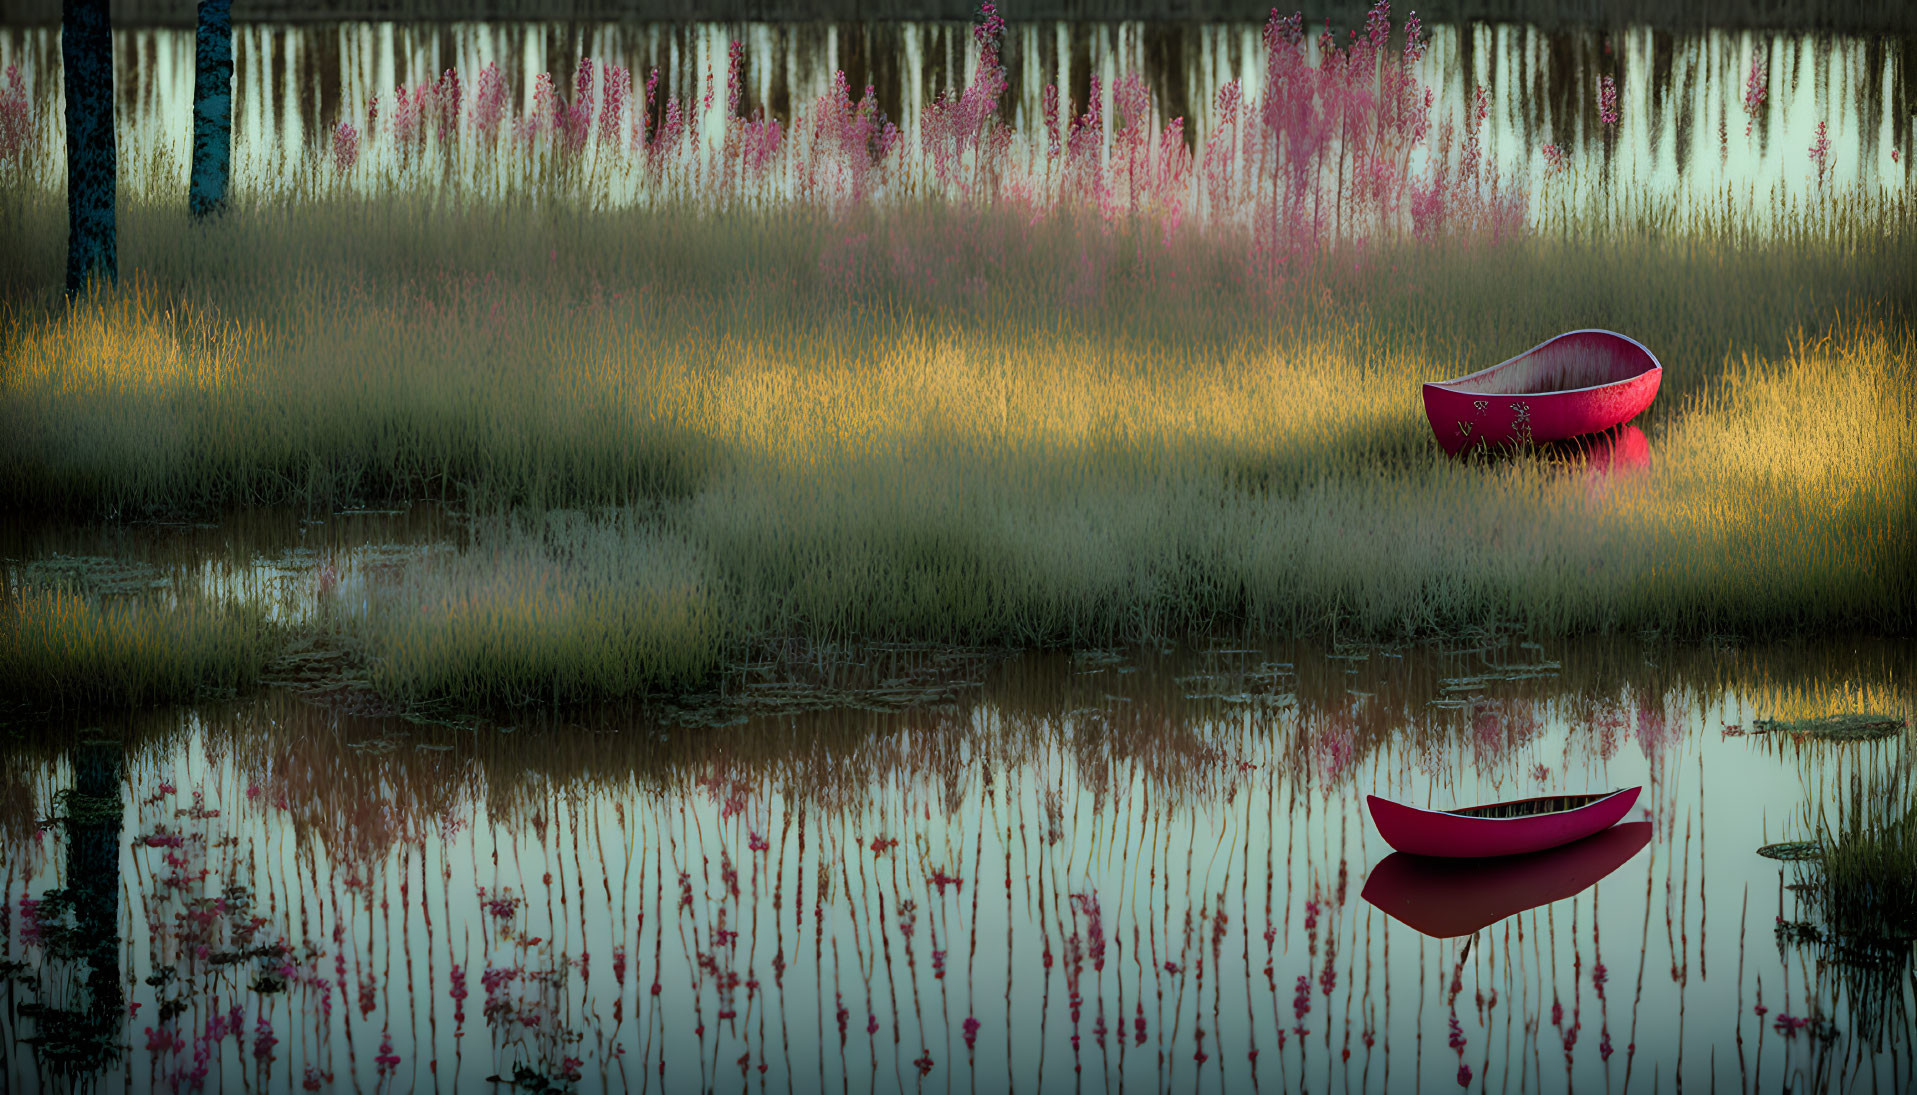 The abandoned red boats in the swamp